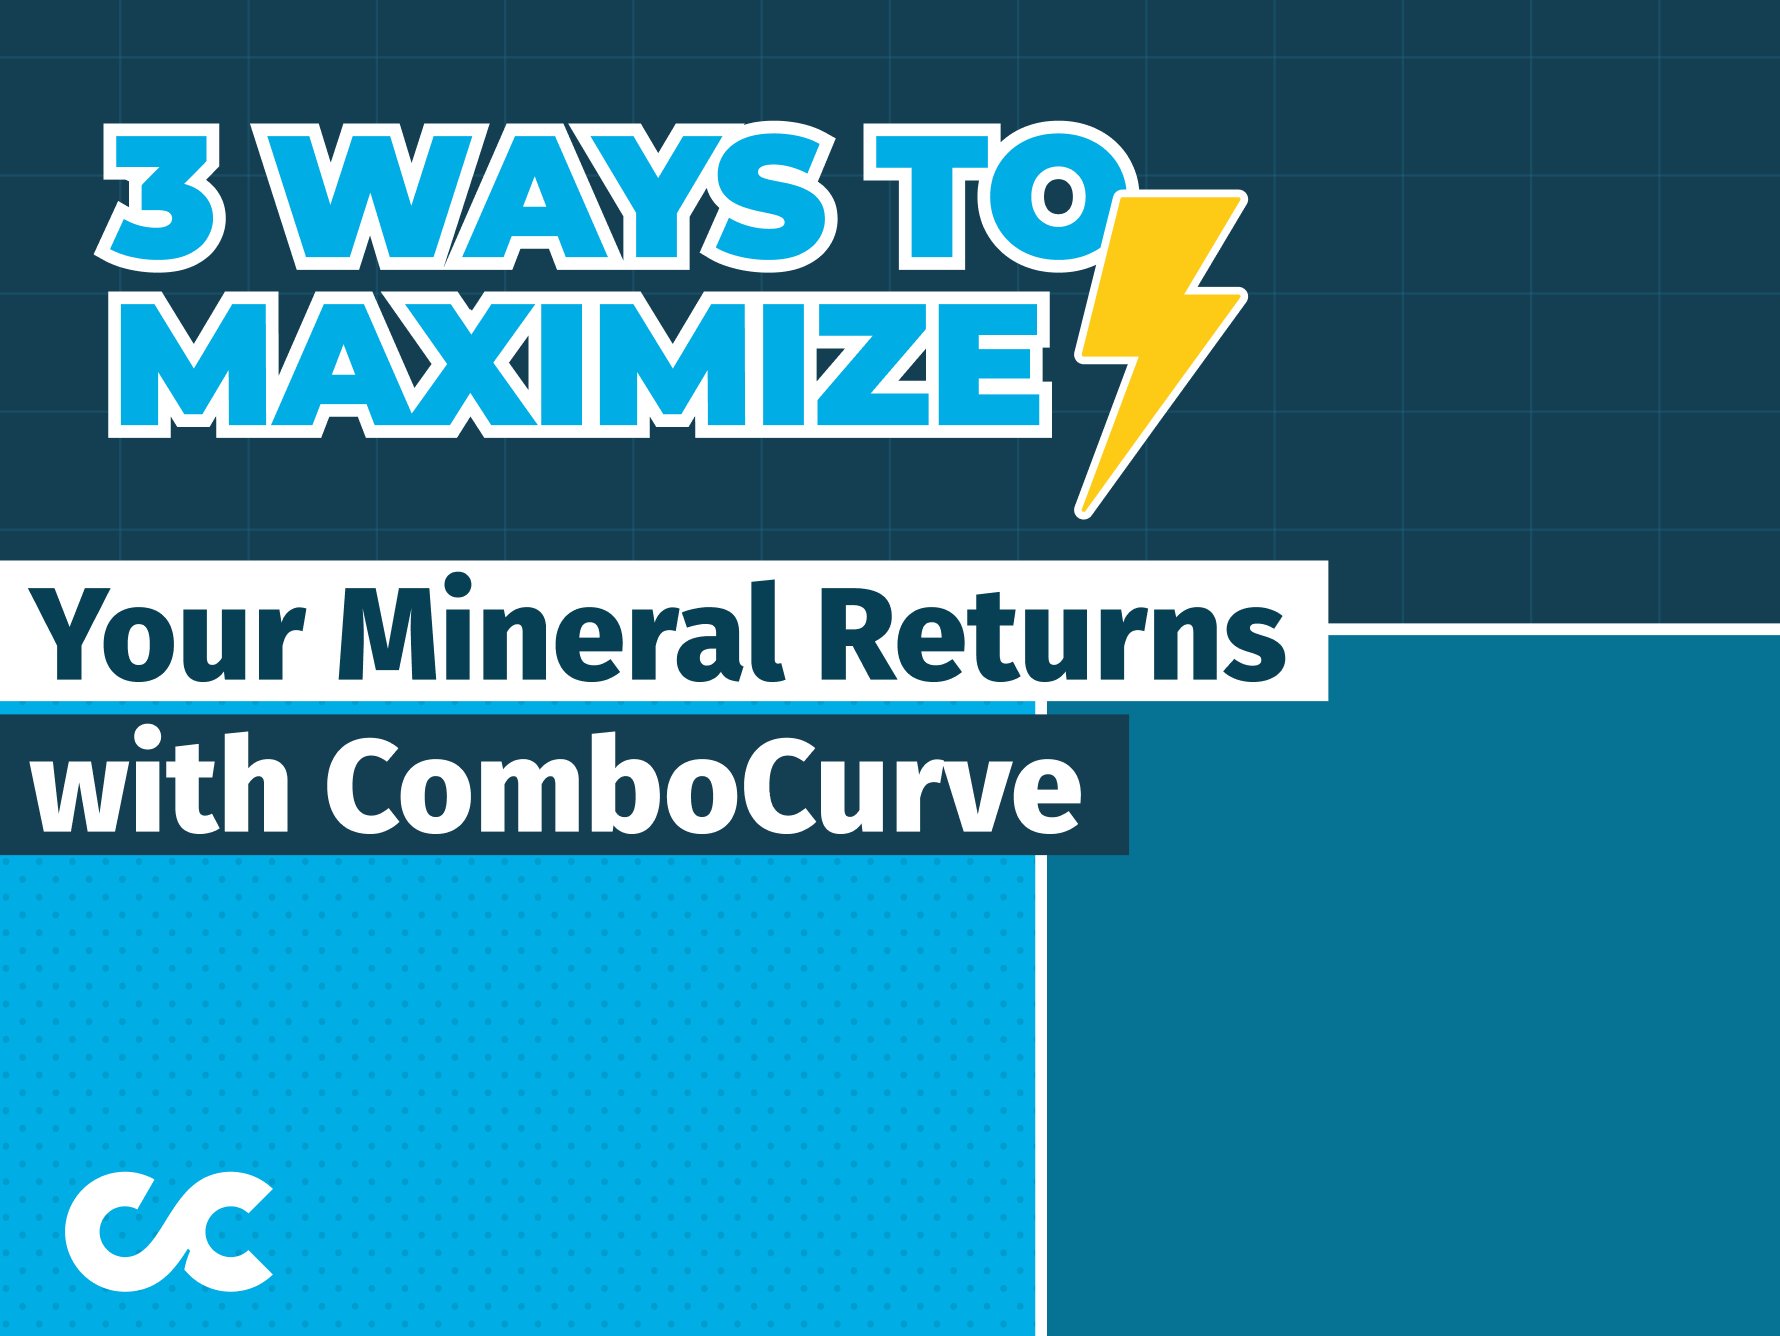 Maximize your mineral returns